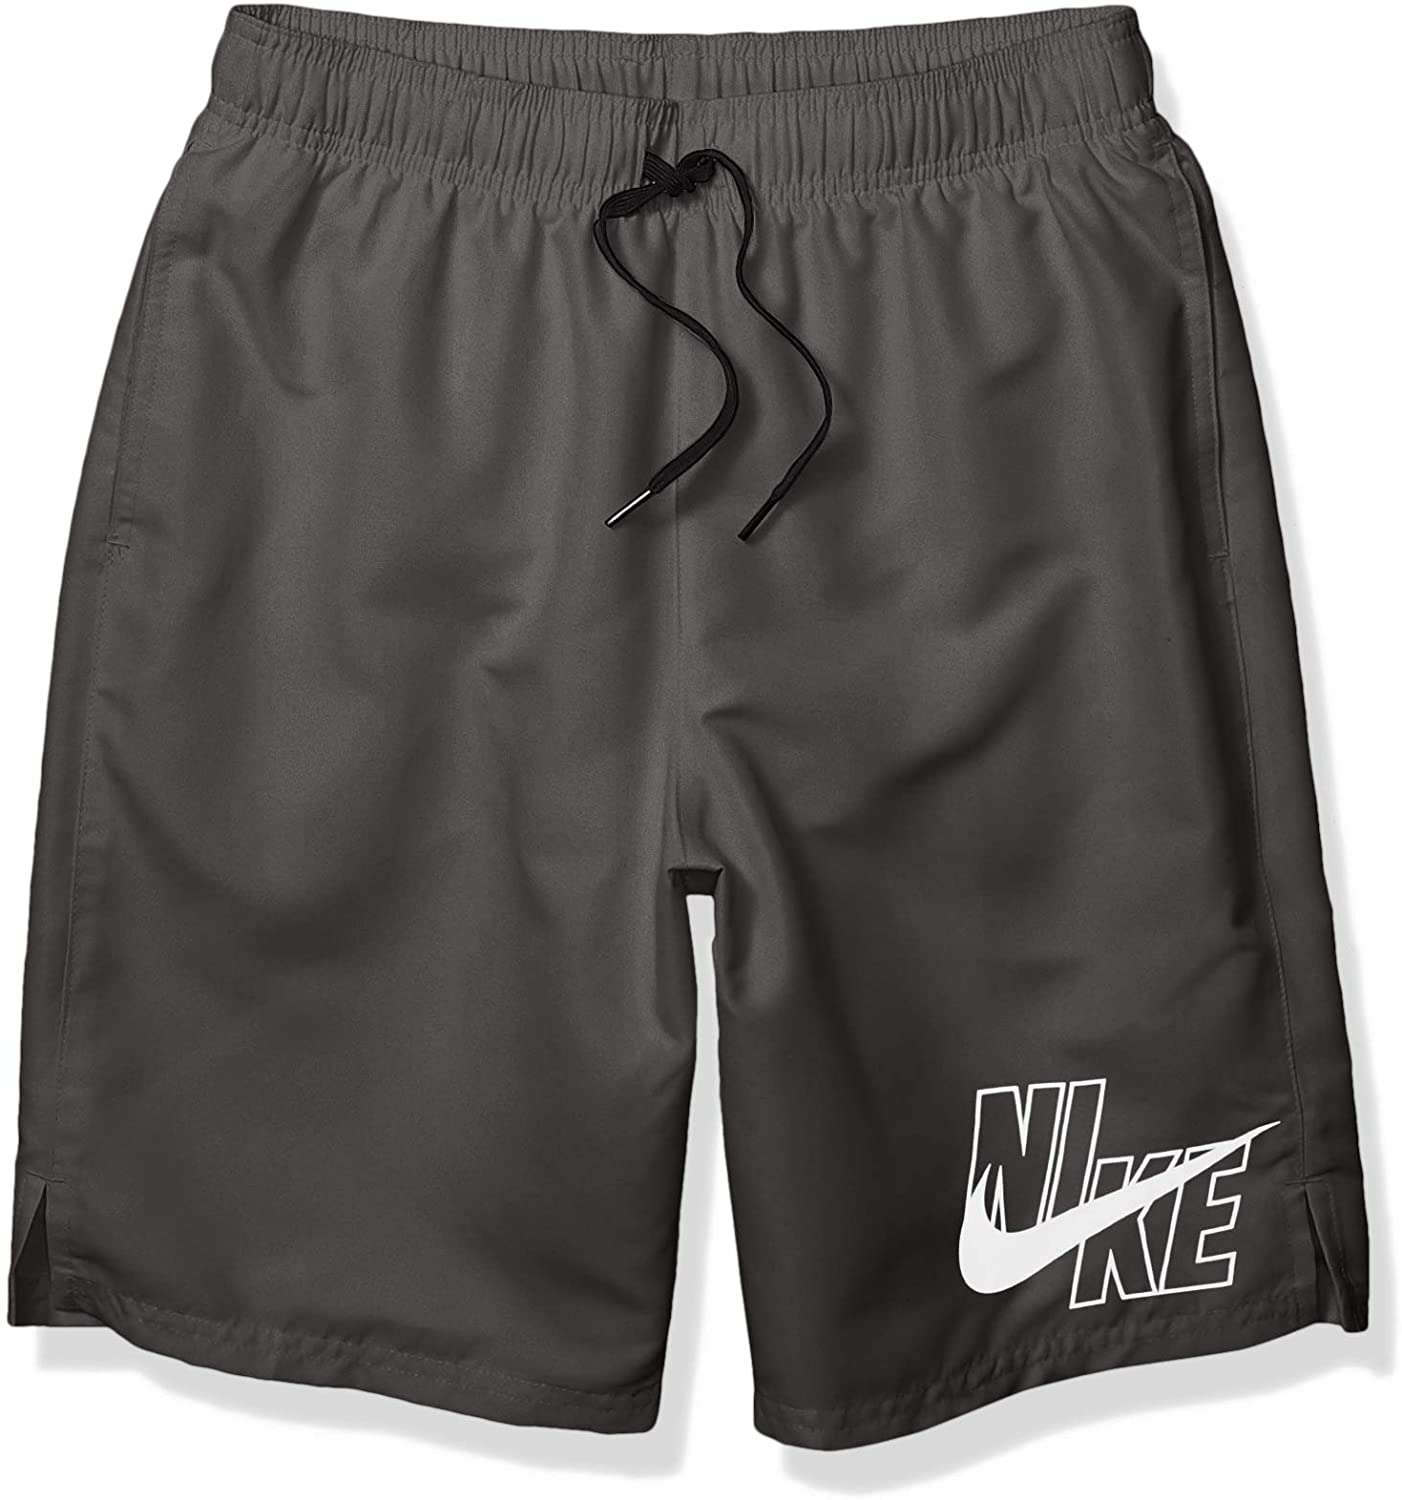 Men's Nike Logo Solid Lap 9" Volley Short Swim Trunk in Iron Grey color from the front